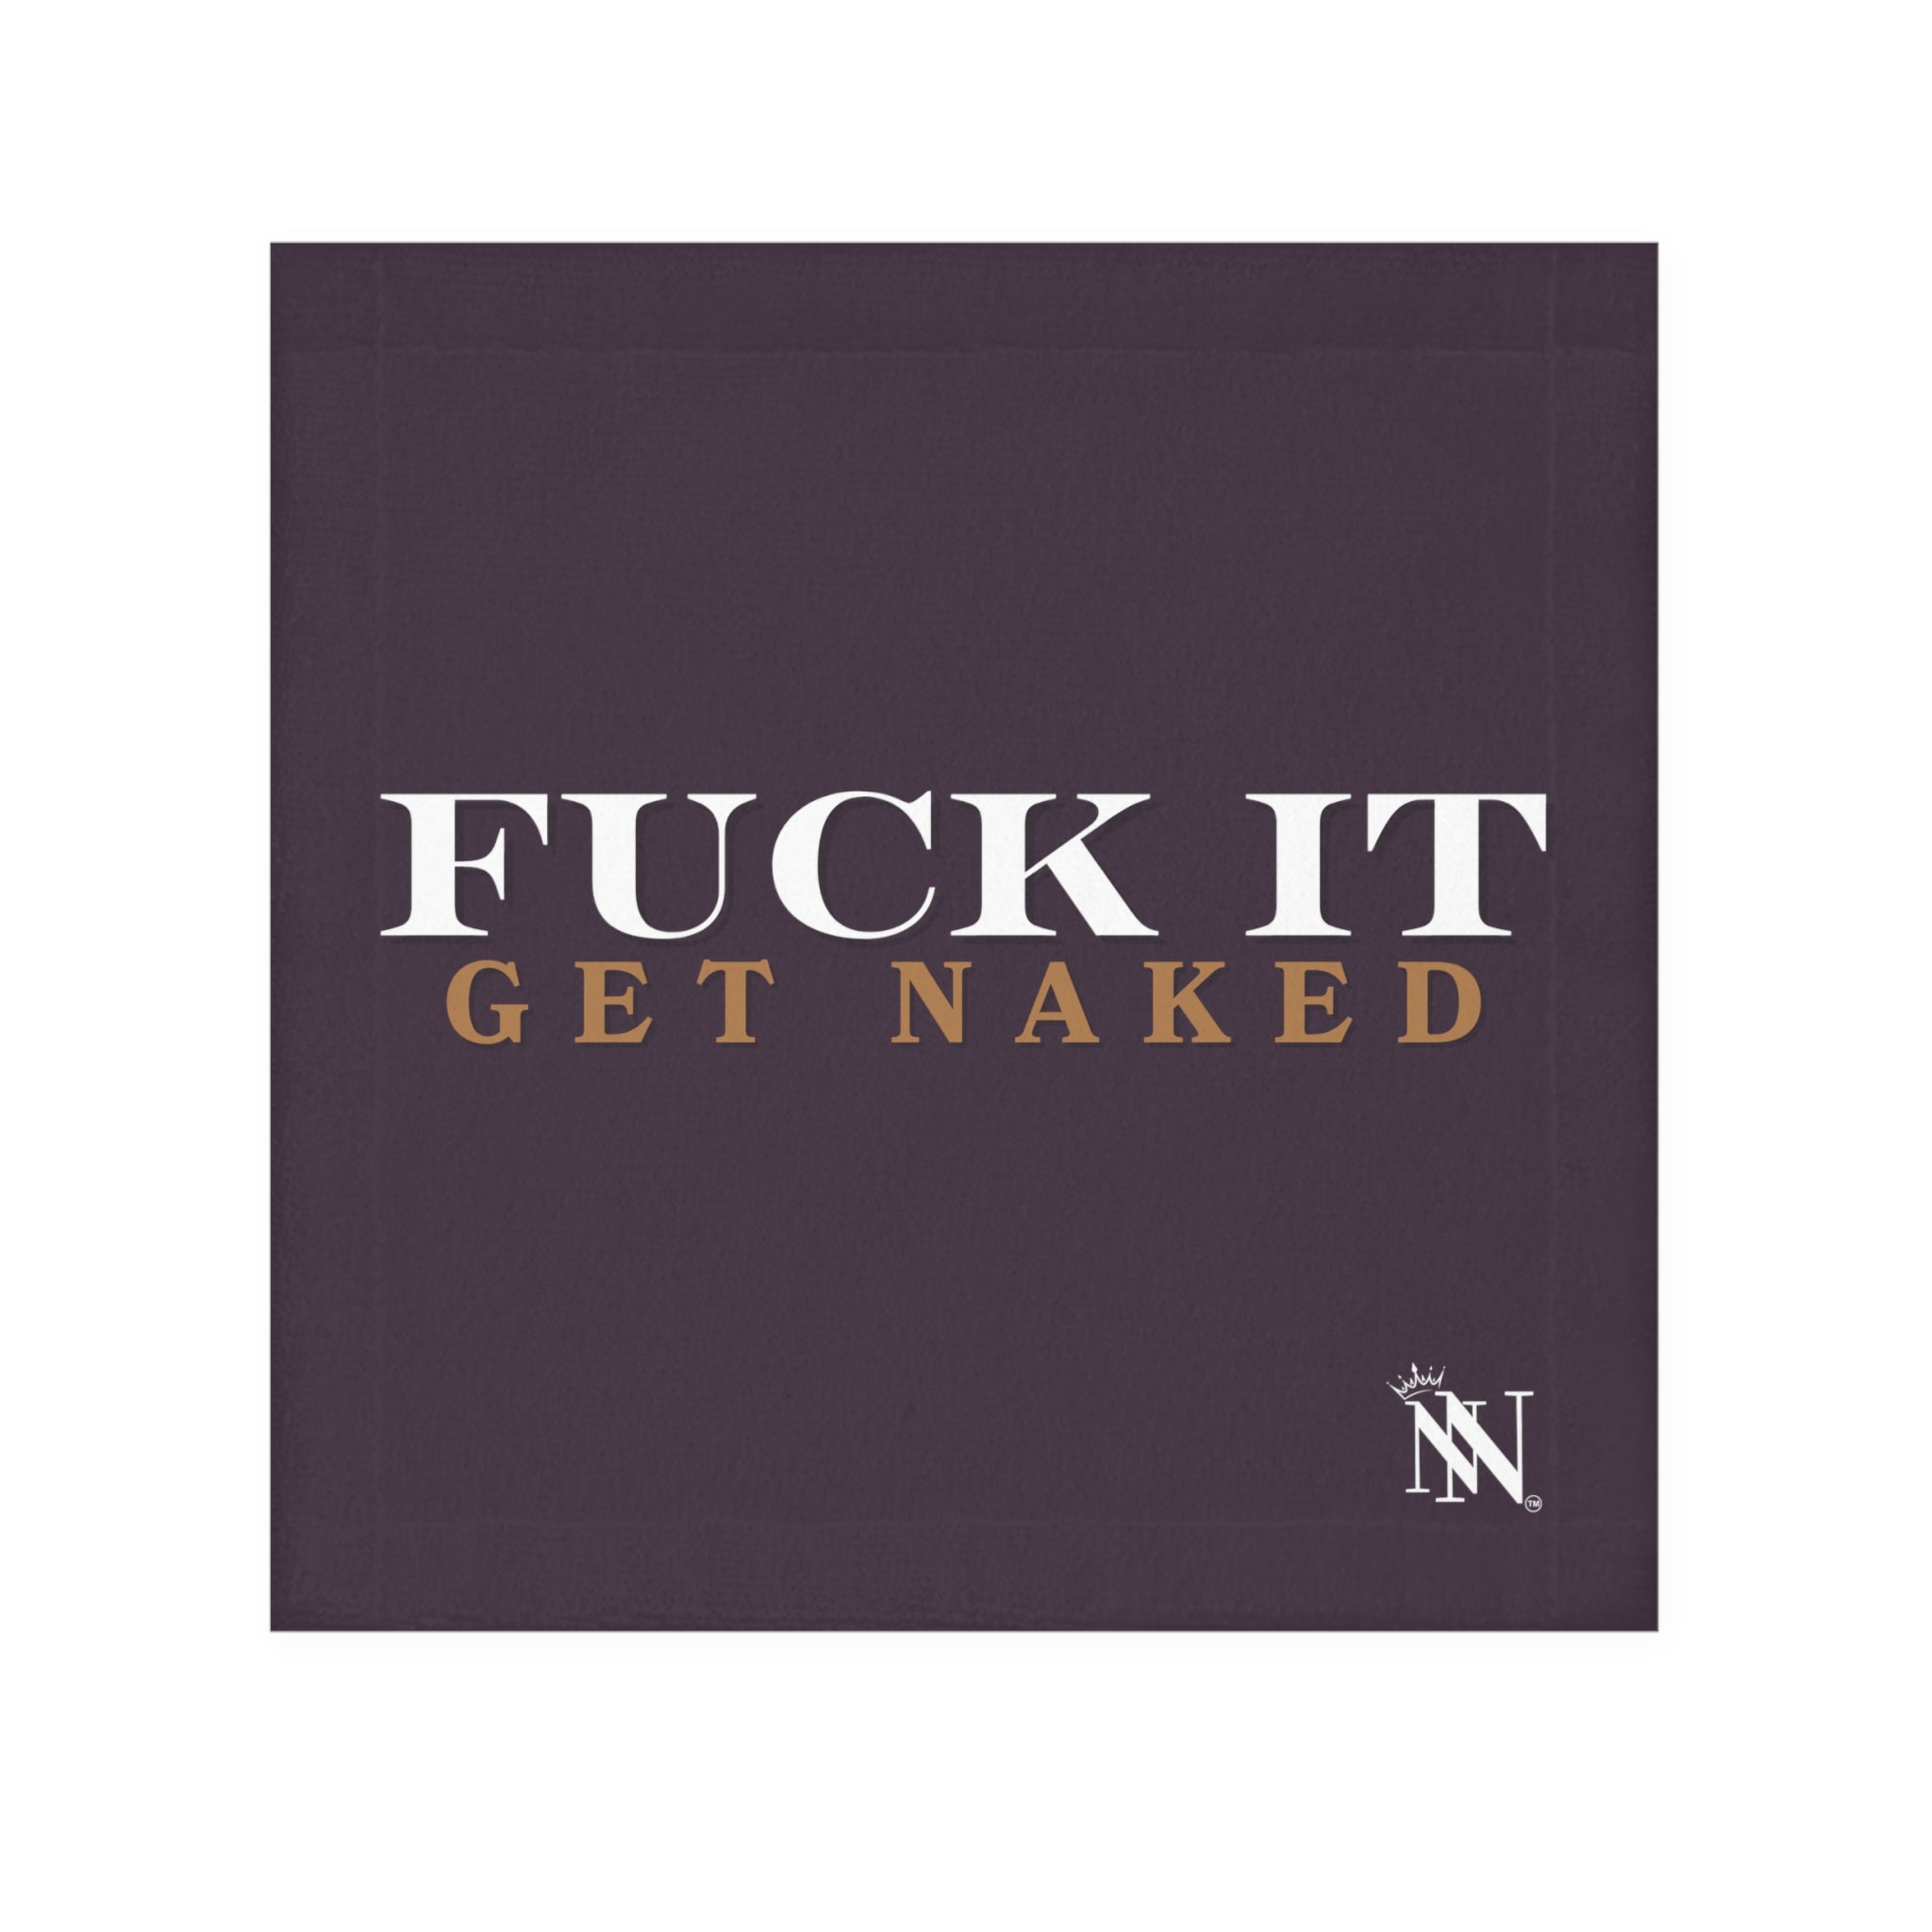 Fuck it get naked towel 